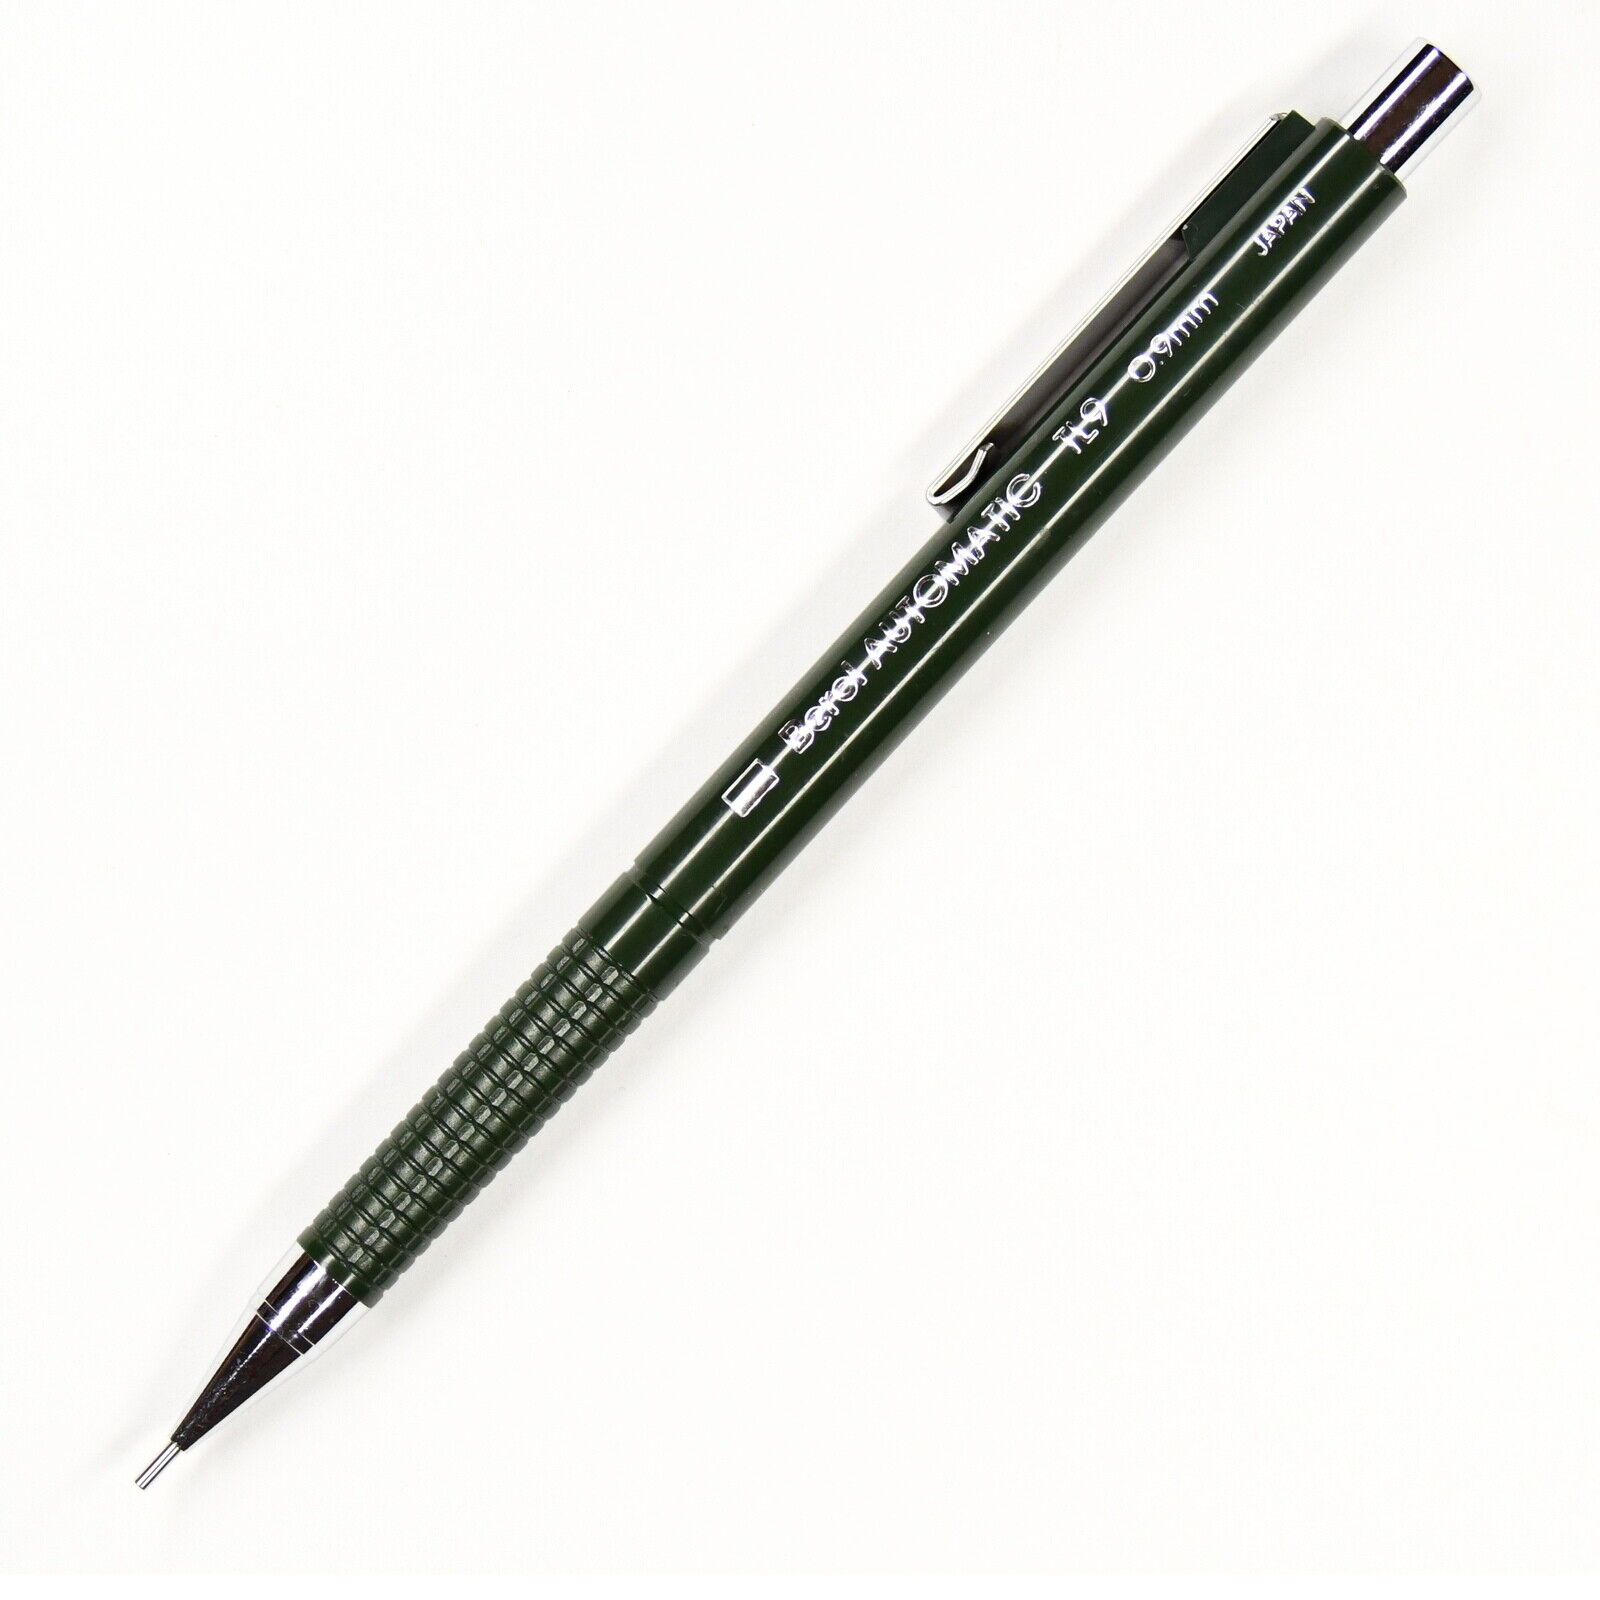 Berol AUTOMATIC 0.9mm Mechanical Pencil w/ Shock Absorber Point TL9